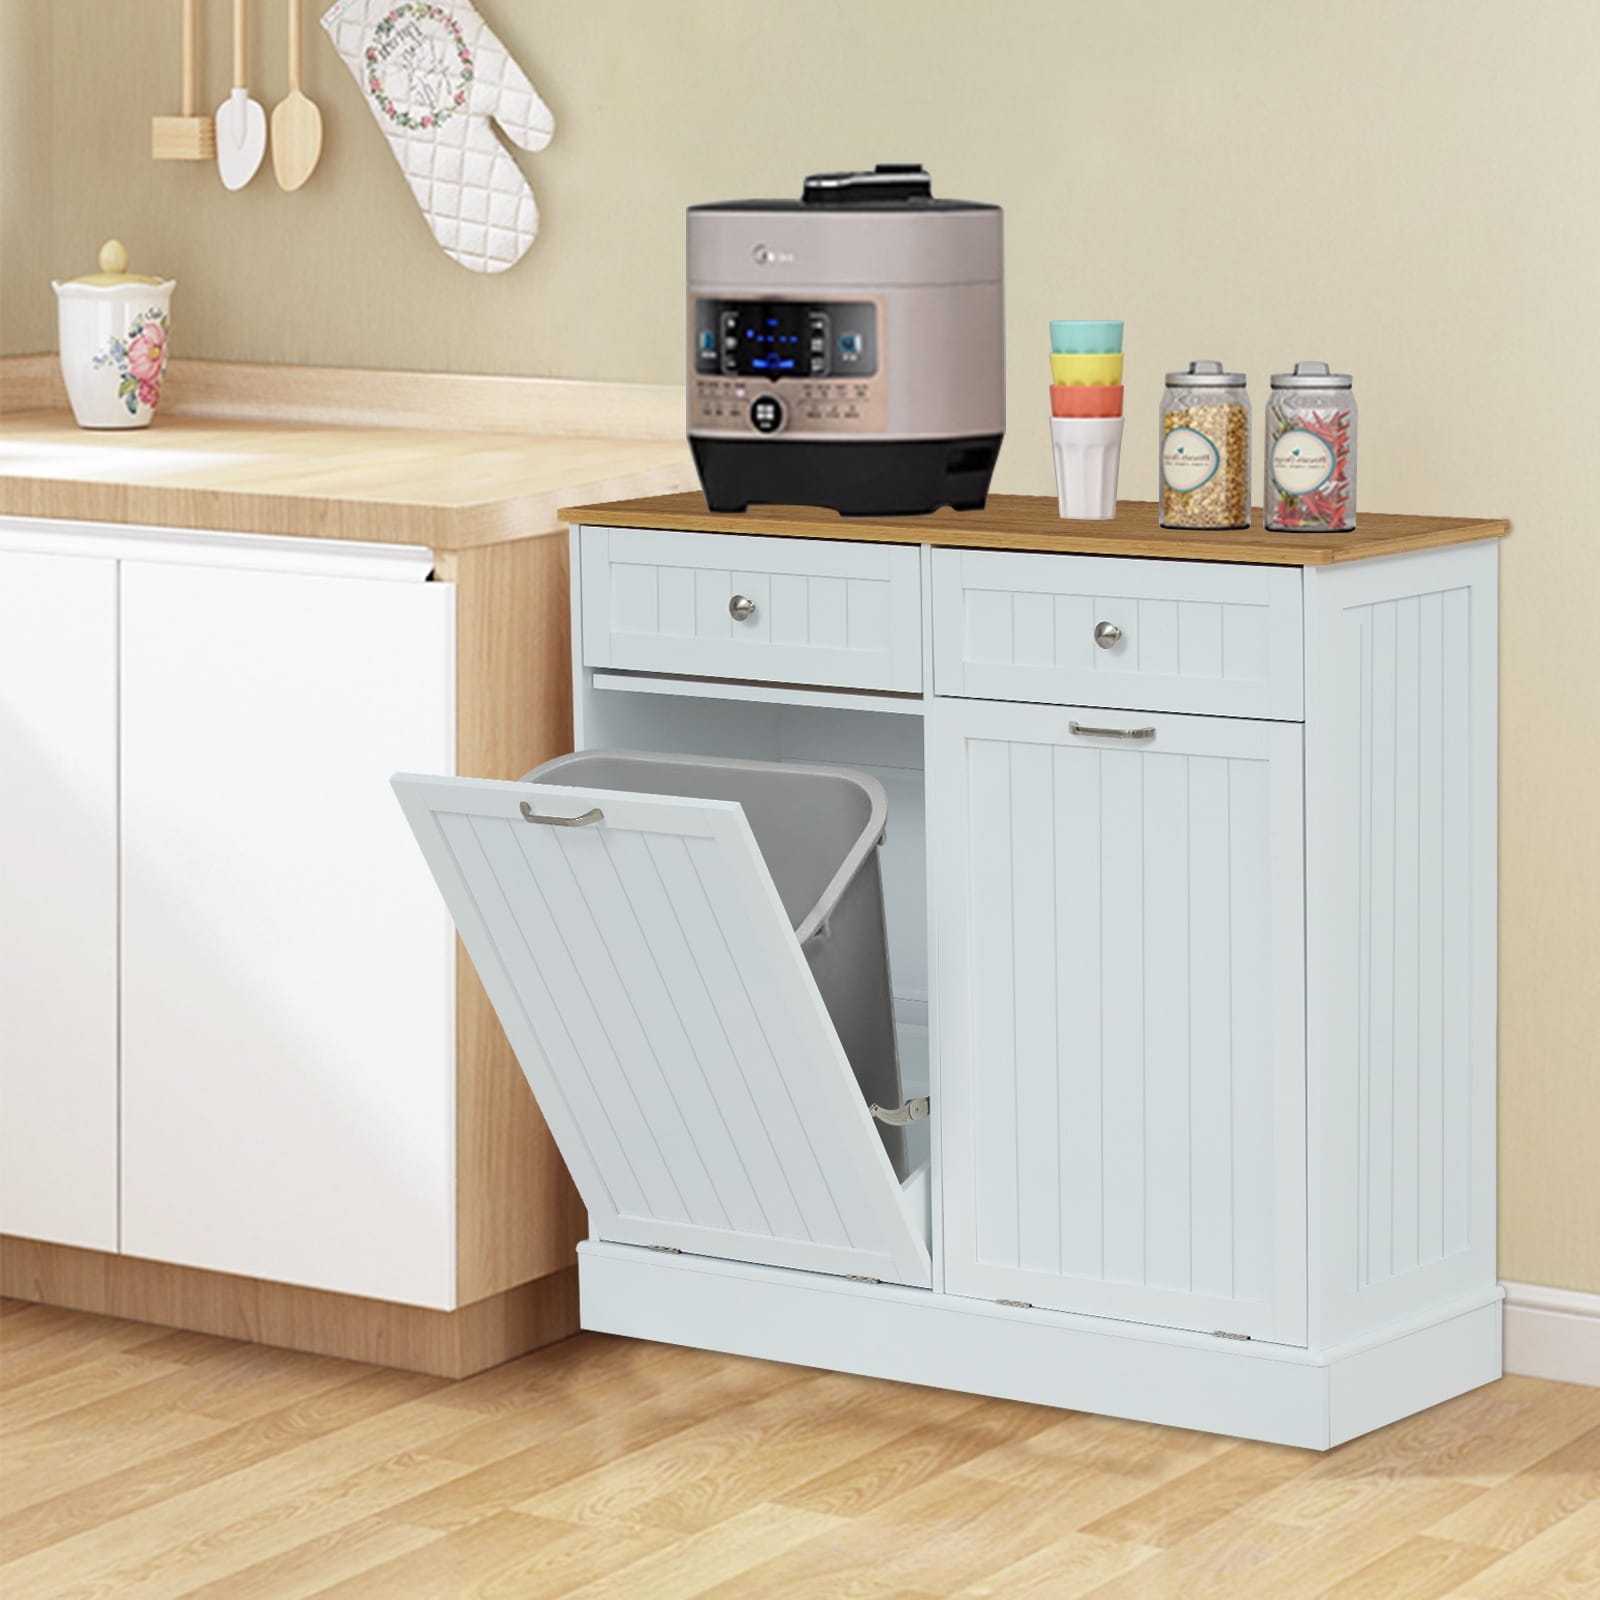 https://ak1.ostkcdn.com/images/products/is/images/direct/4a1499cef73577b2ad44dc79ffa9ac593dbf7332/Kinbor-Tilt-Out-Trash-Cabinet-Wooden-Kitchen-Trash-Bin-Can%2CRecycling-Cabinet-w--Drawer-and-Removable-Bamboo-Cutting-Board%2C-White.jpg